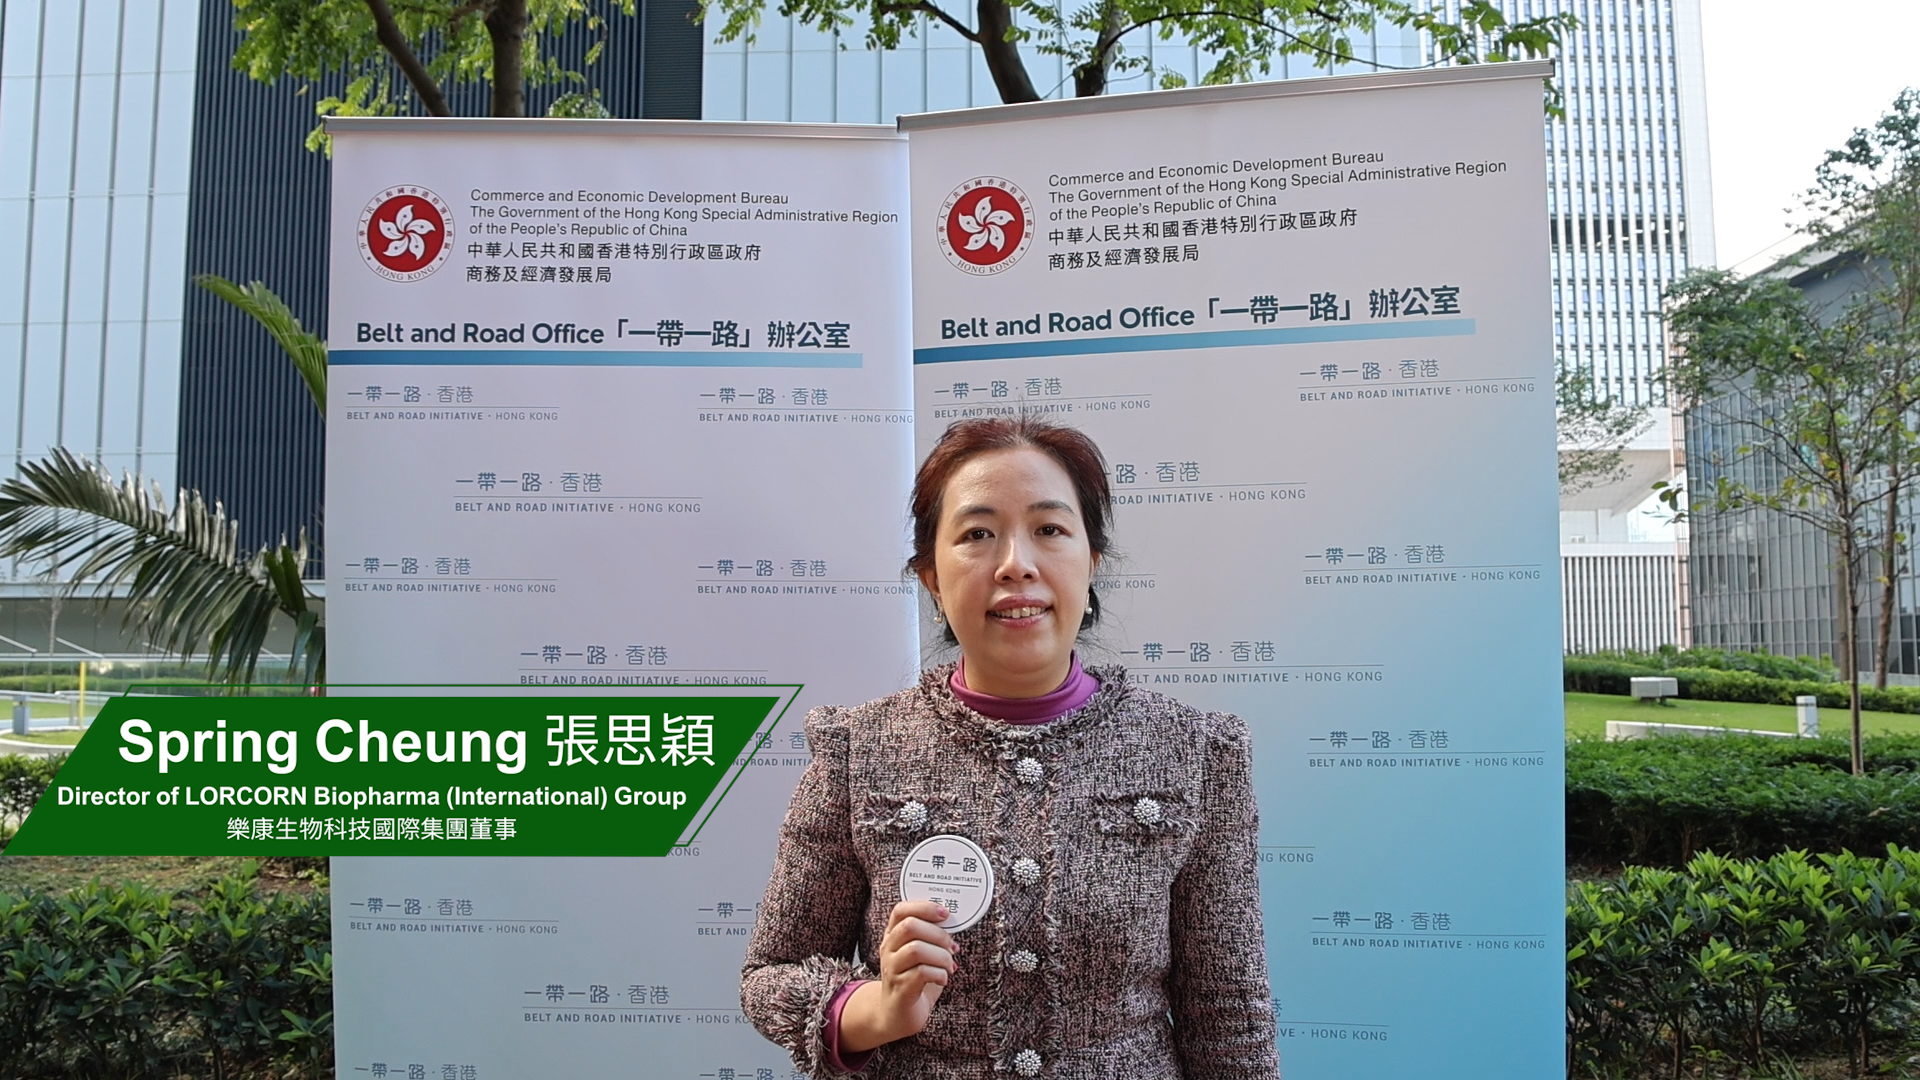 Interview with Ms Spring Cheung